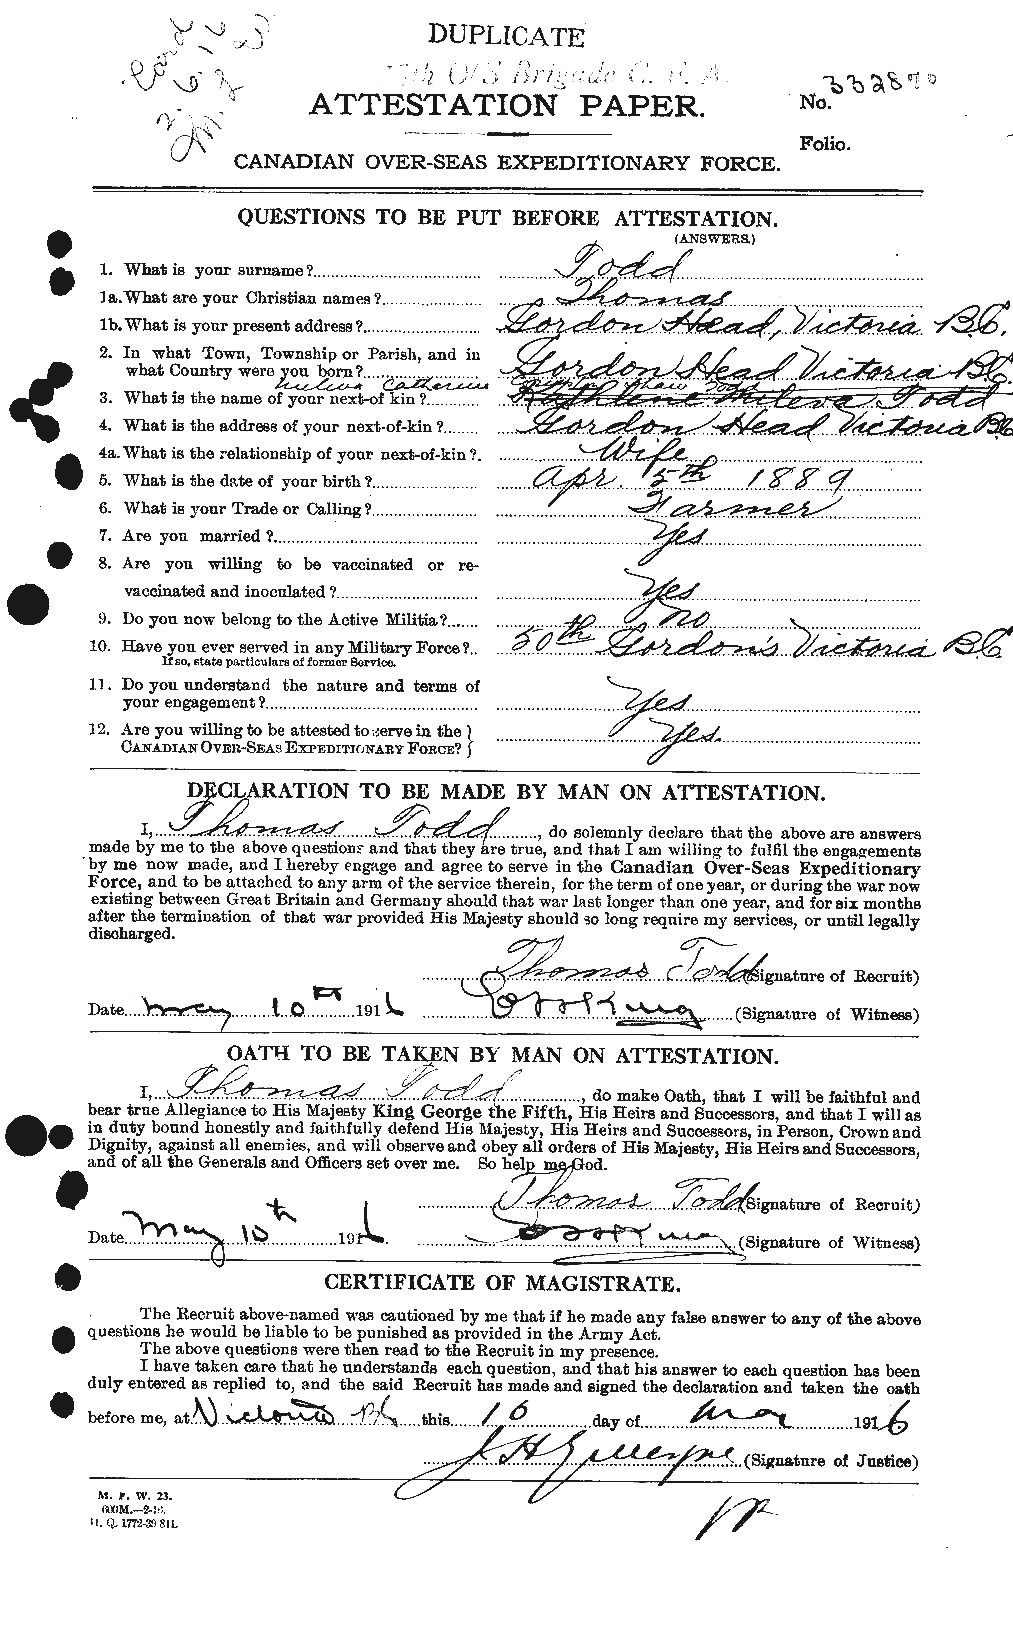 Personnel Records of the First World War - CEF 640879a